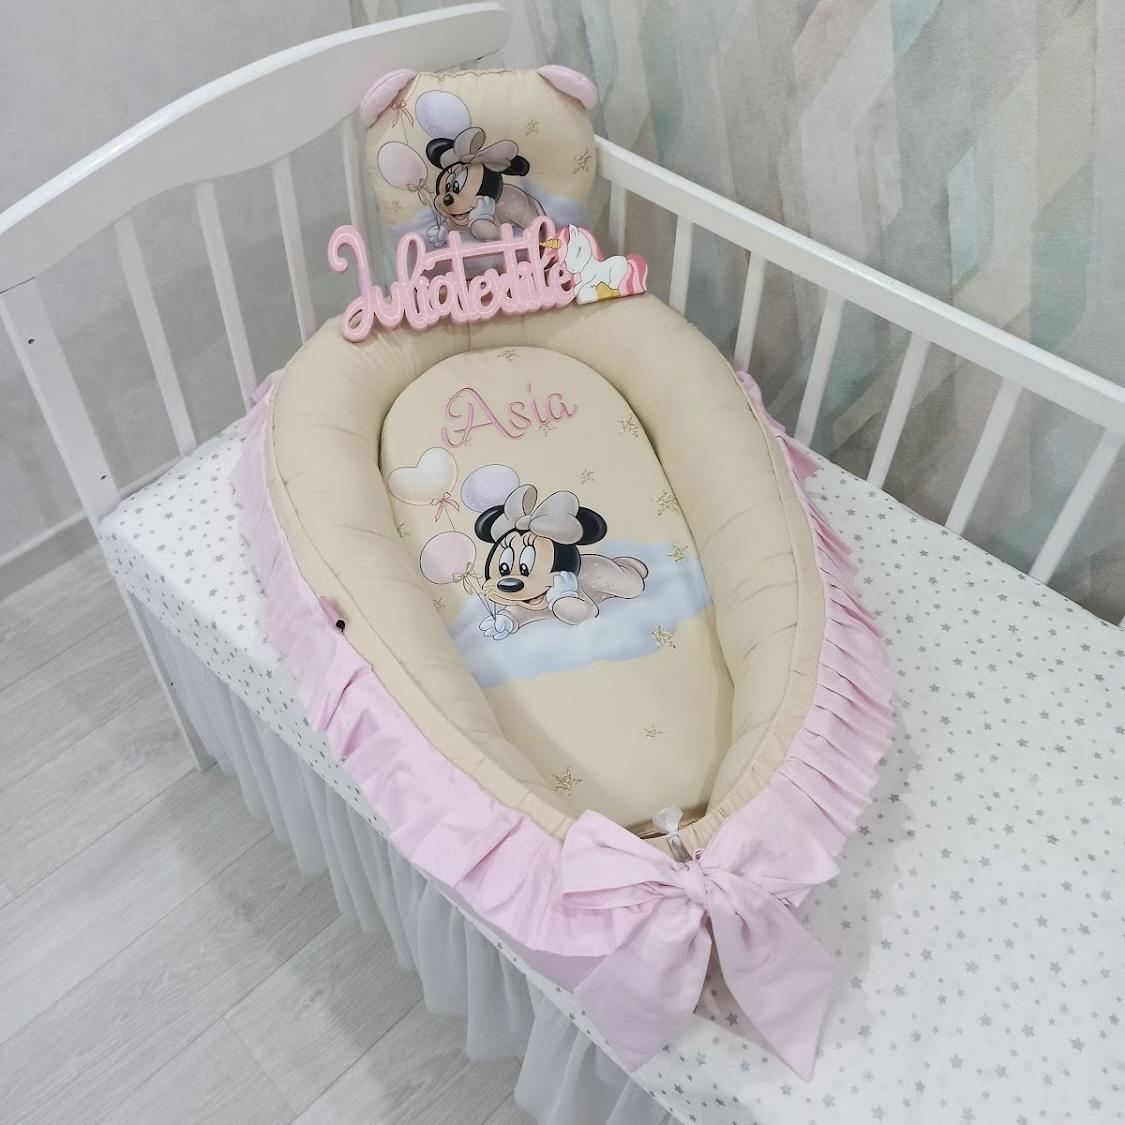 Reducer with the Minnie Mouse heart print and dove-pink balloons